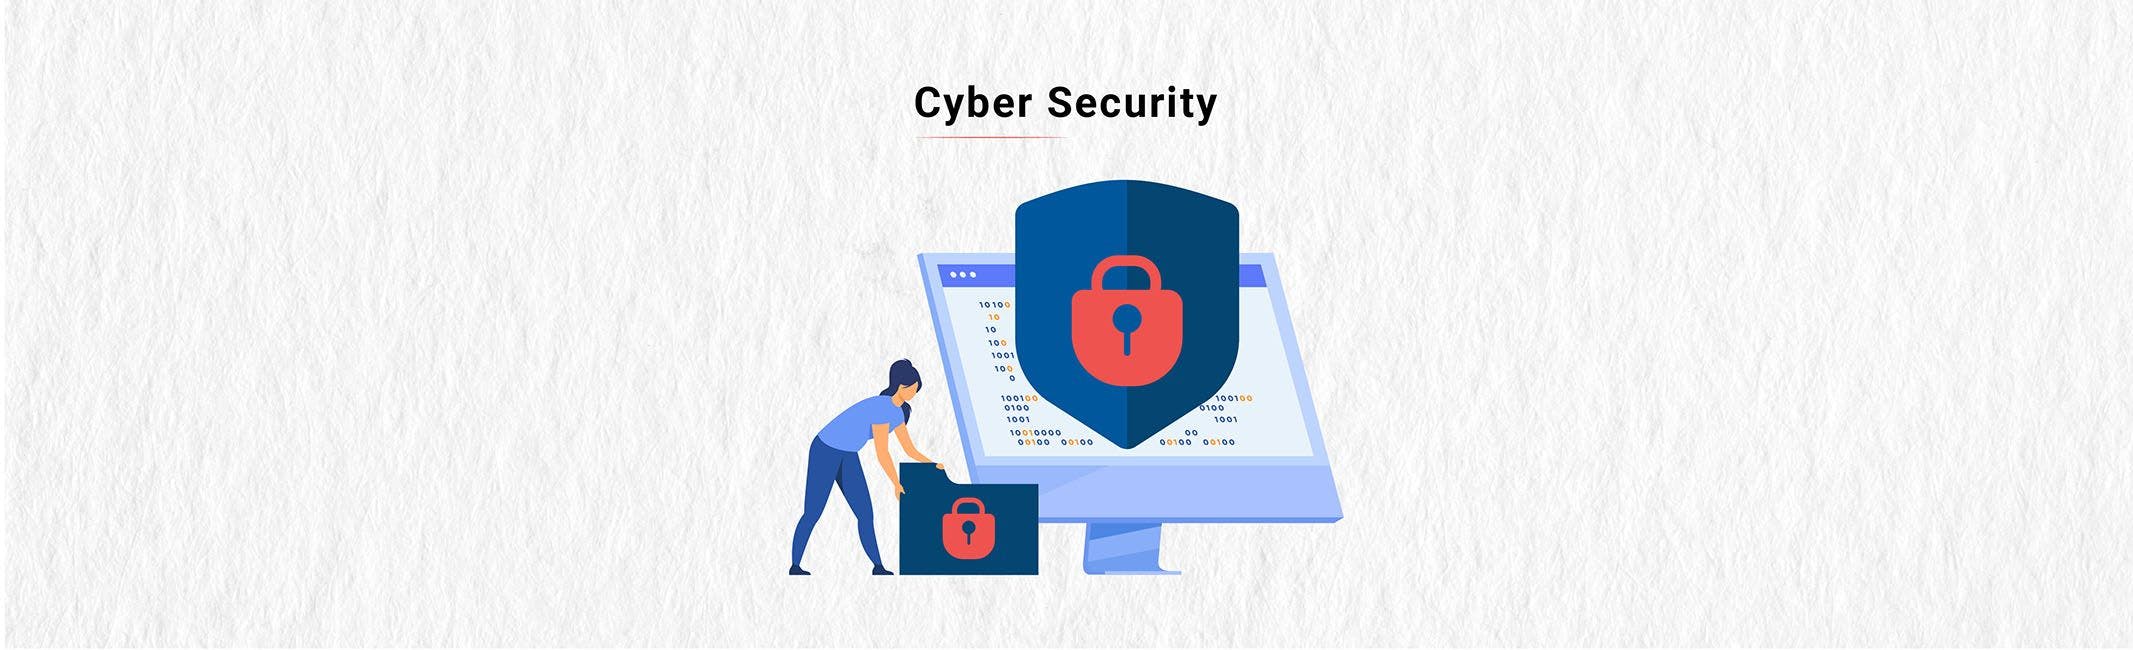 /learning-cybersecurity-what-is-risk-management-r33f35yk feature image